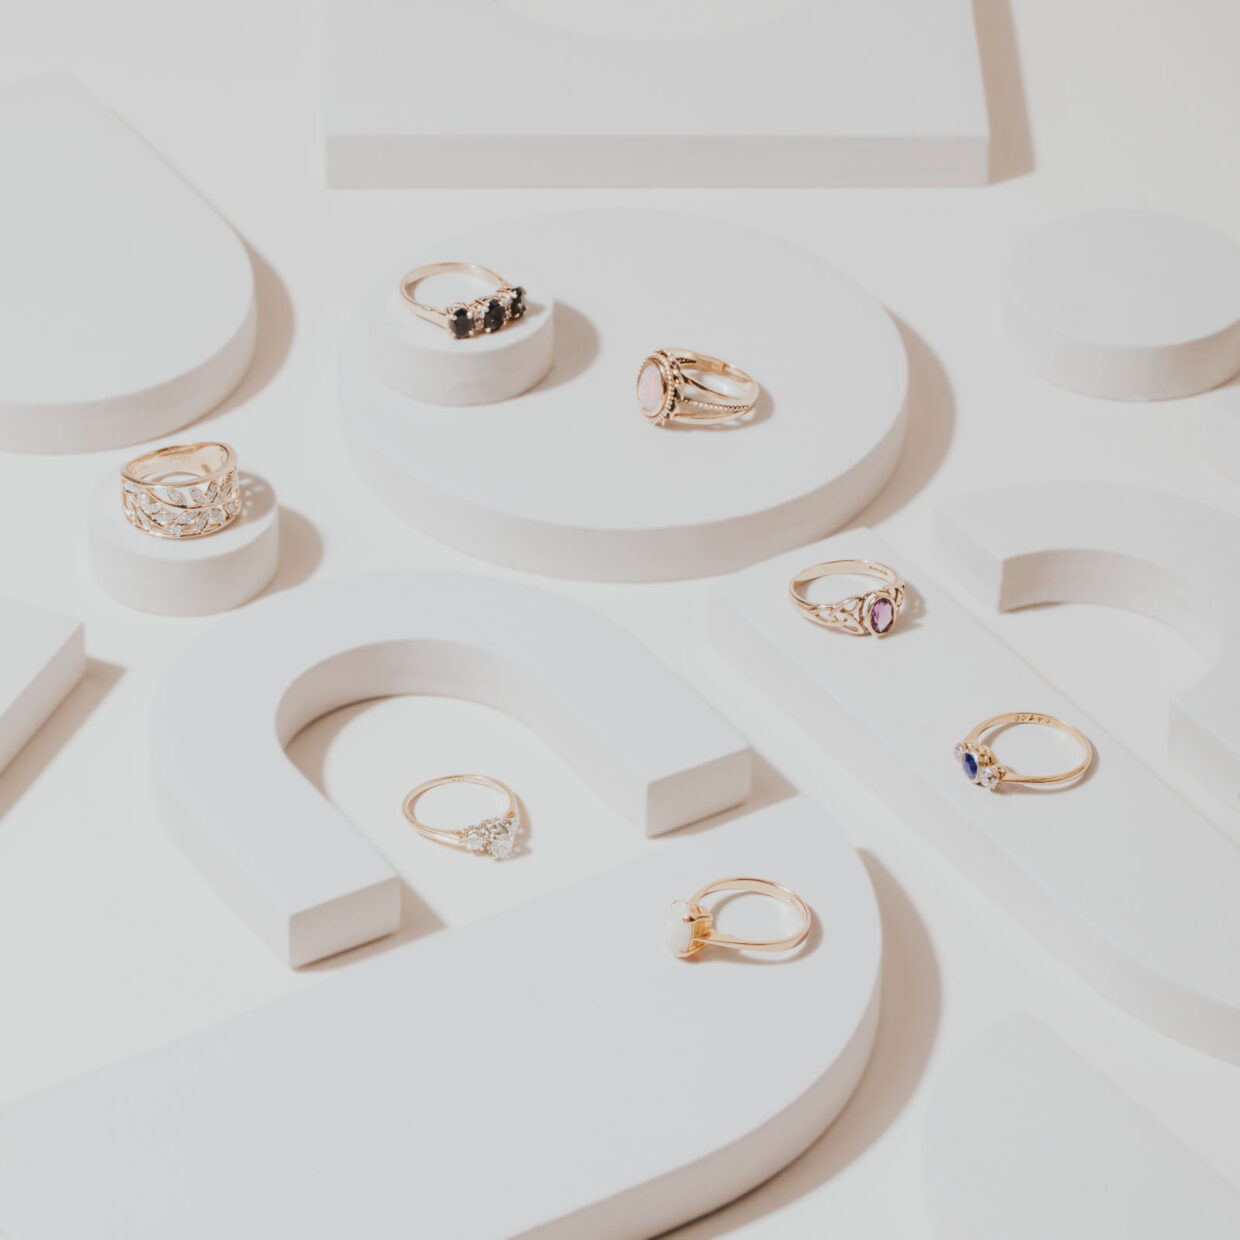 Many multiple rings layflat for commercial product photography for e-comm.